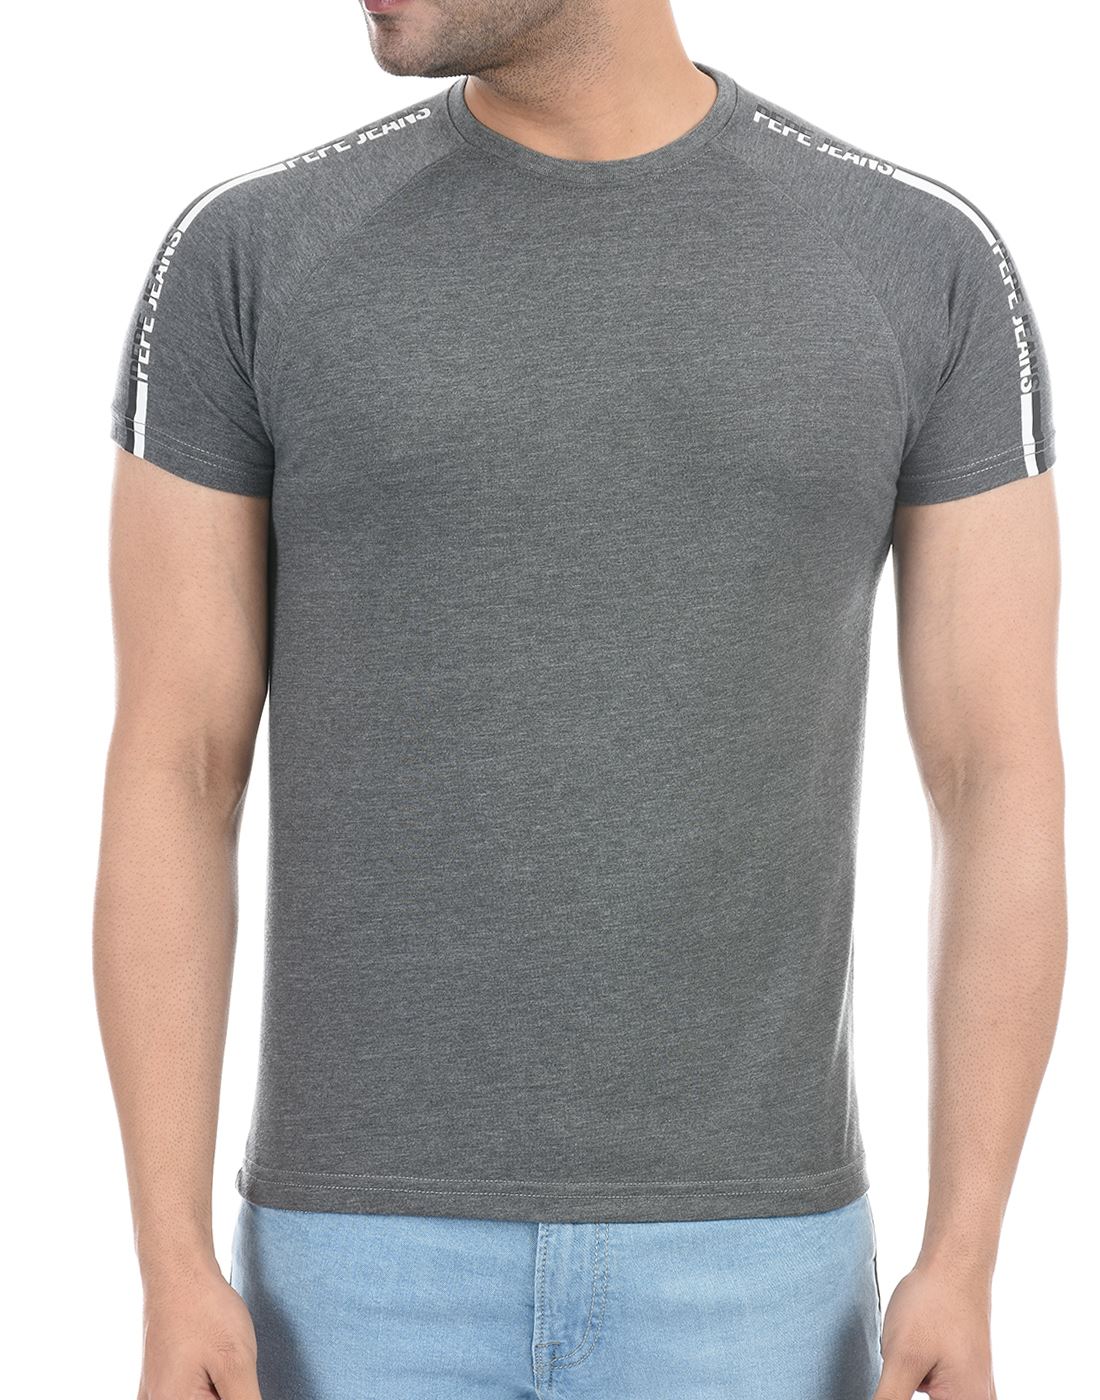 | | 144422 Pepe Jeans Men Grey Grey Wear T-Shirt Solid Casual